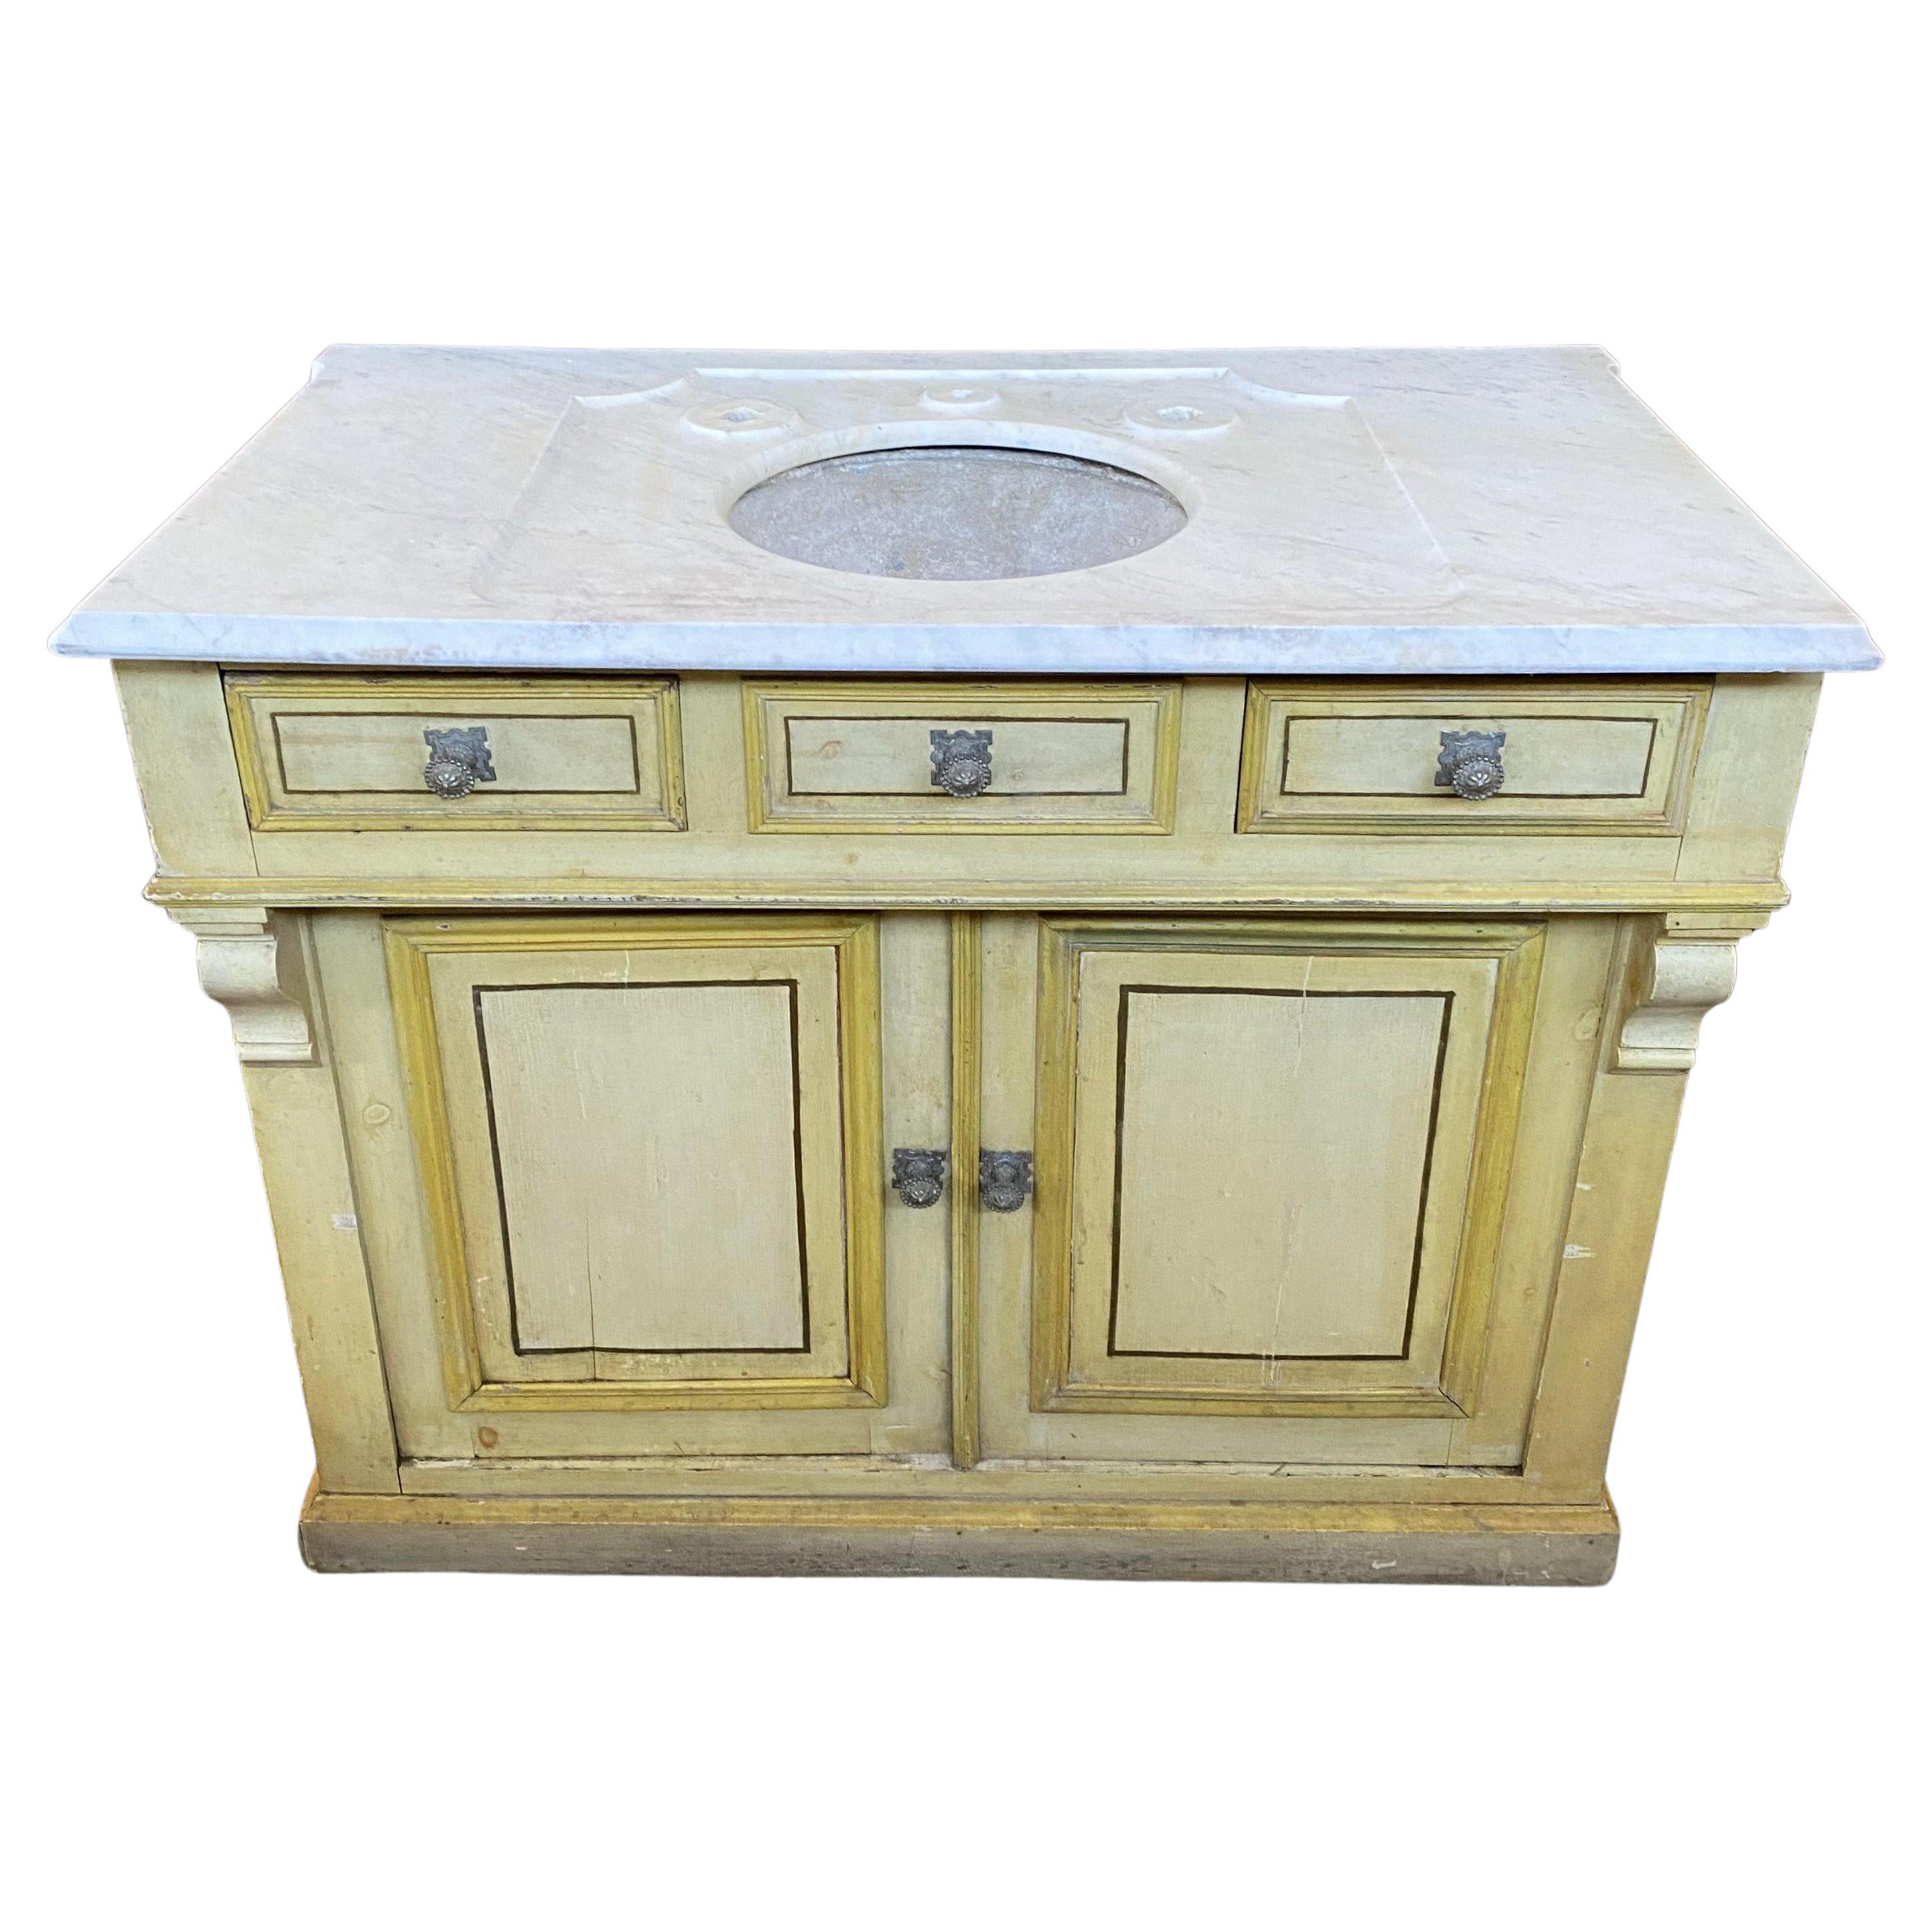 Spectacular 19th Century French Marble Countertop Sink Cabinet